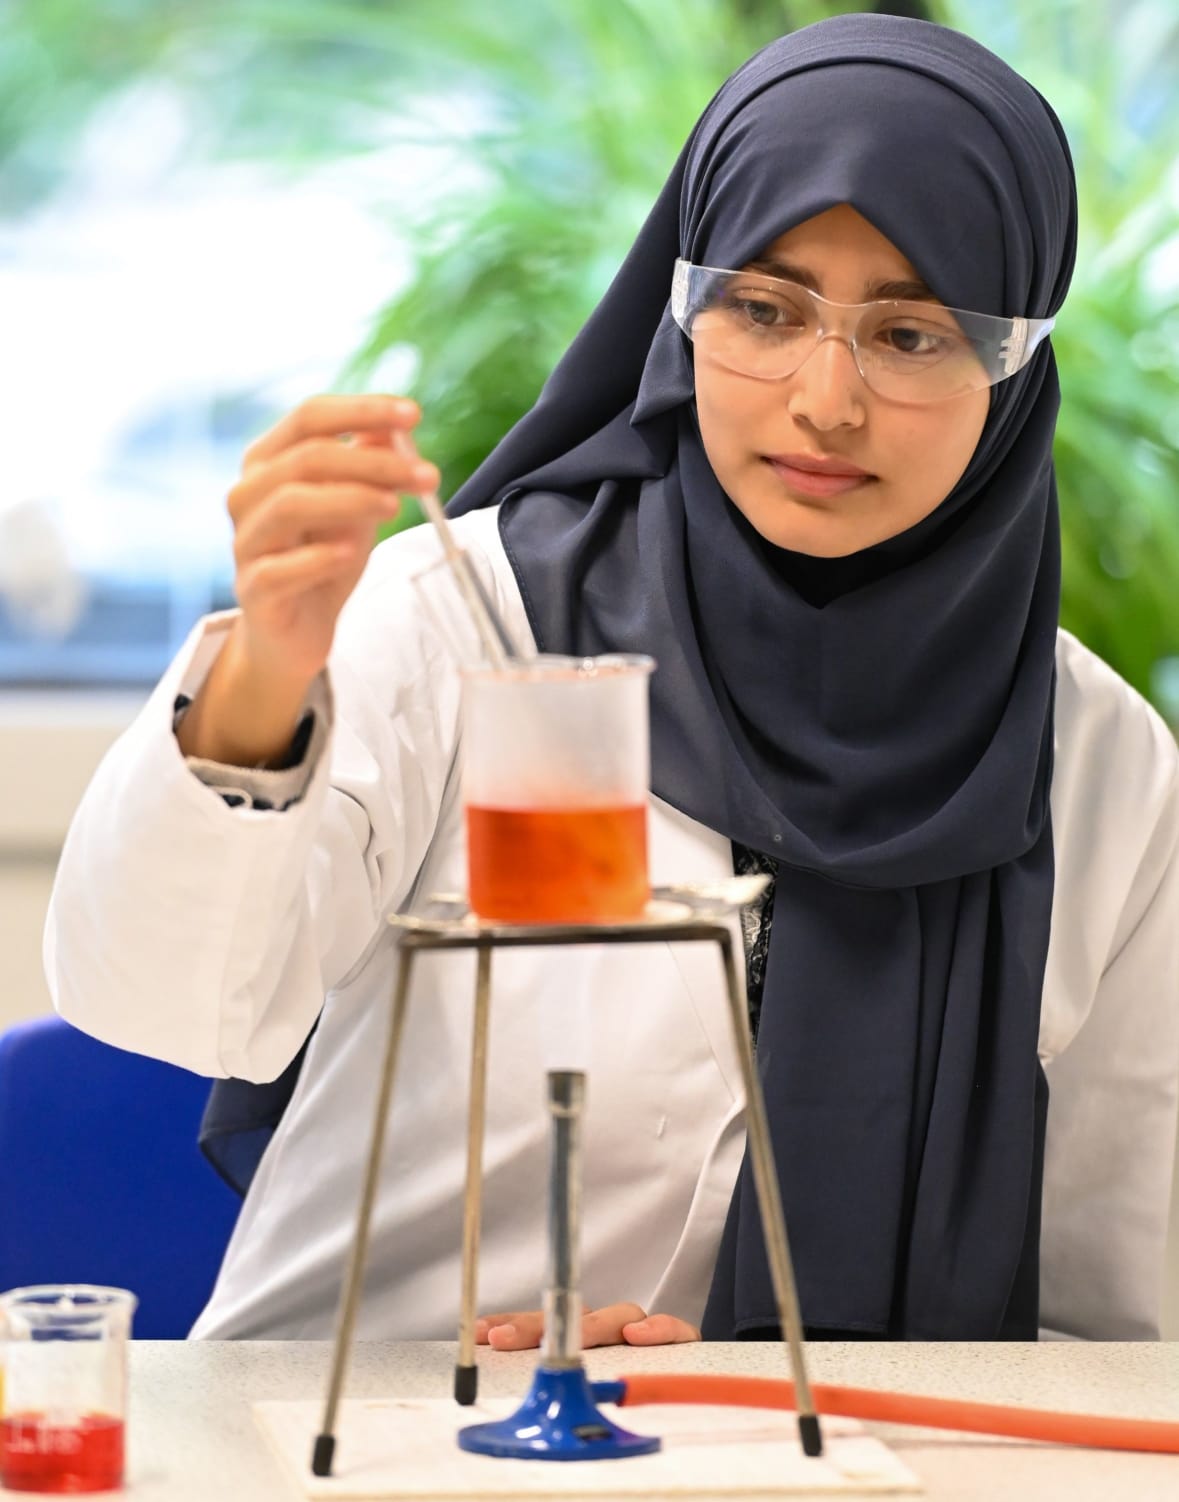 Girl wearing hijab, white lab coat and goggle in a classroom, adding liquid to a beaker